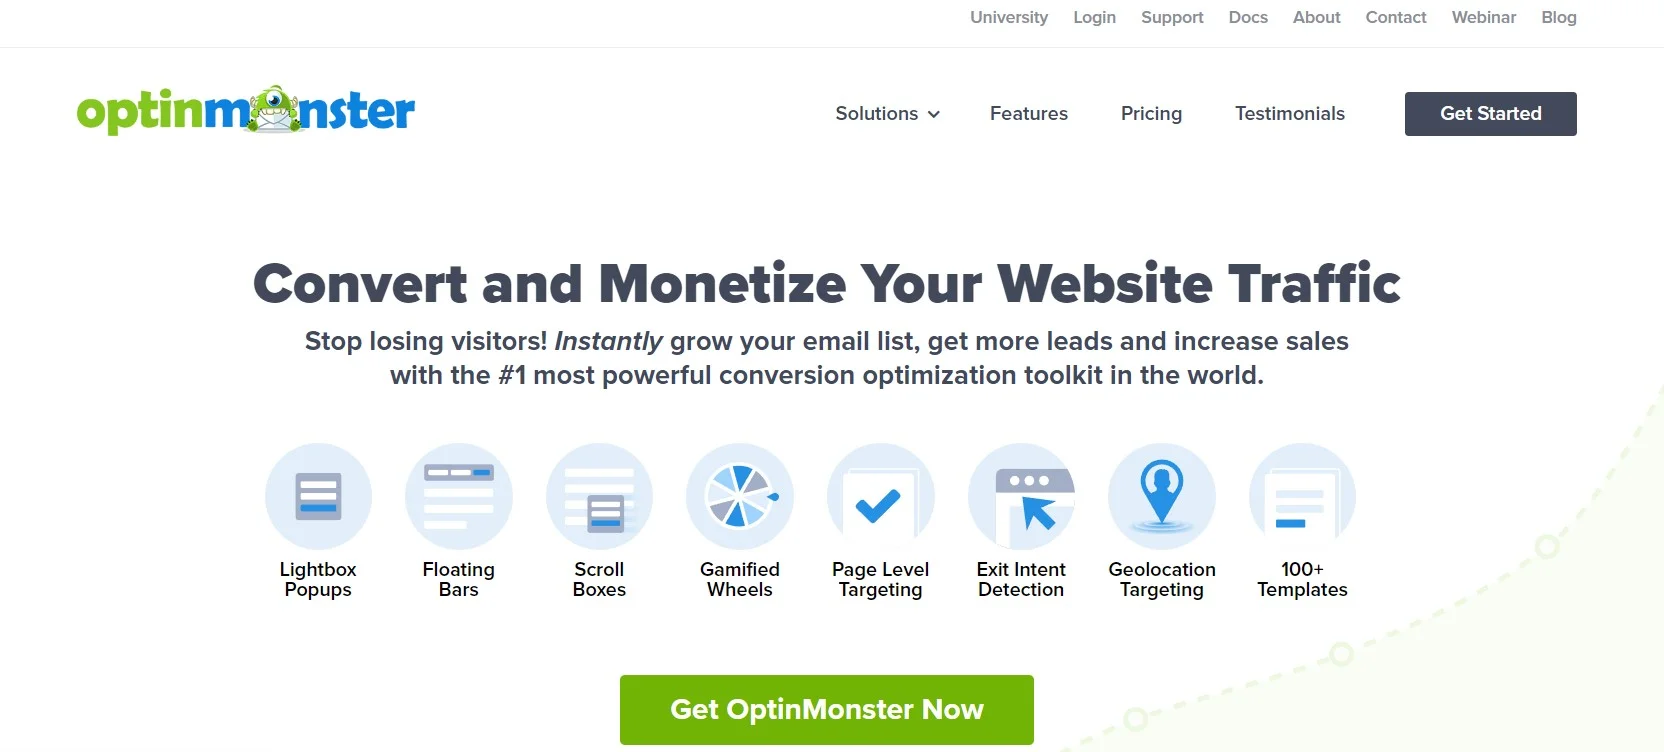 Optinmonster Offers Advanced Targeting Options